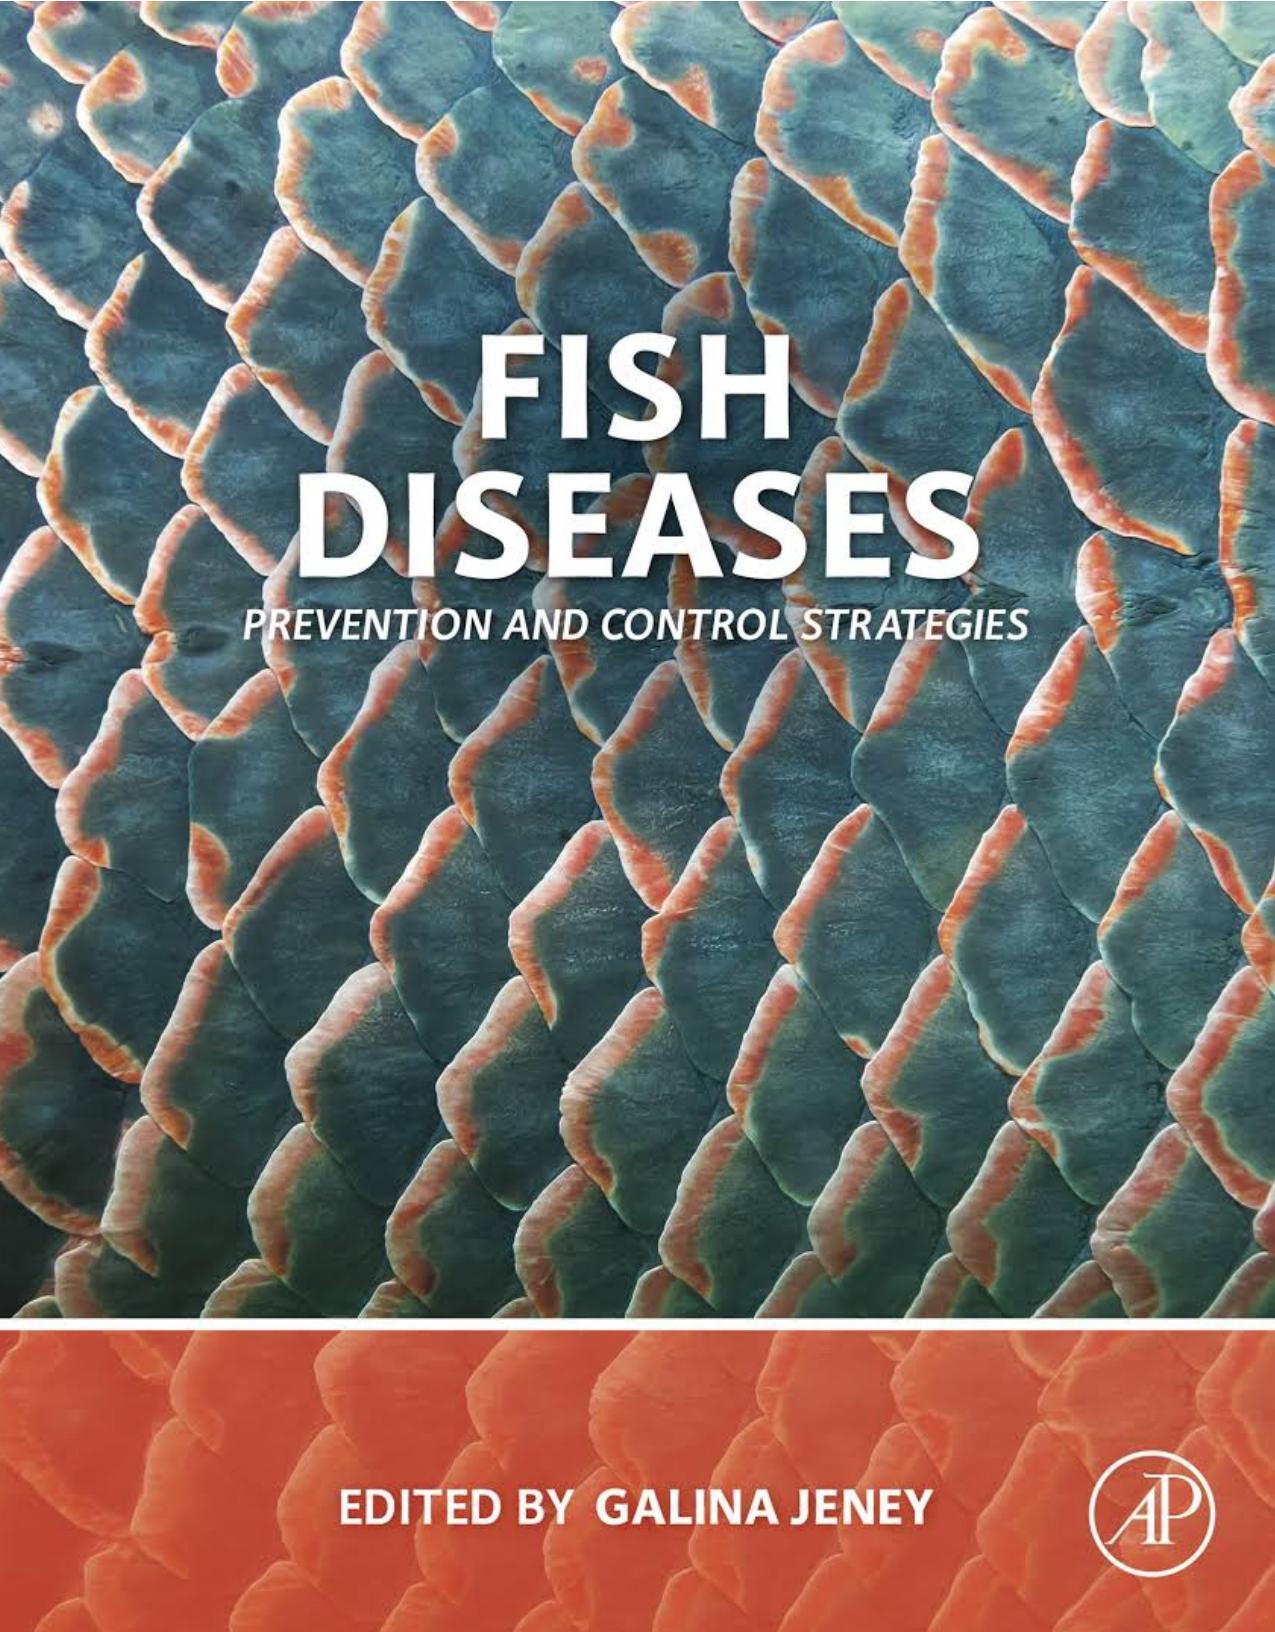 Fish Diseases, Prevention and Control Strategies